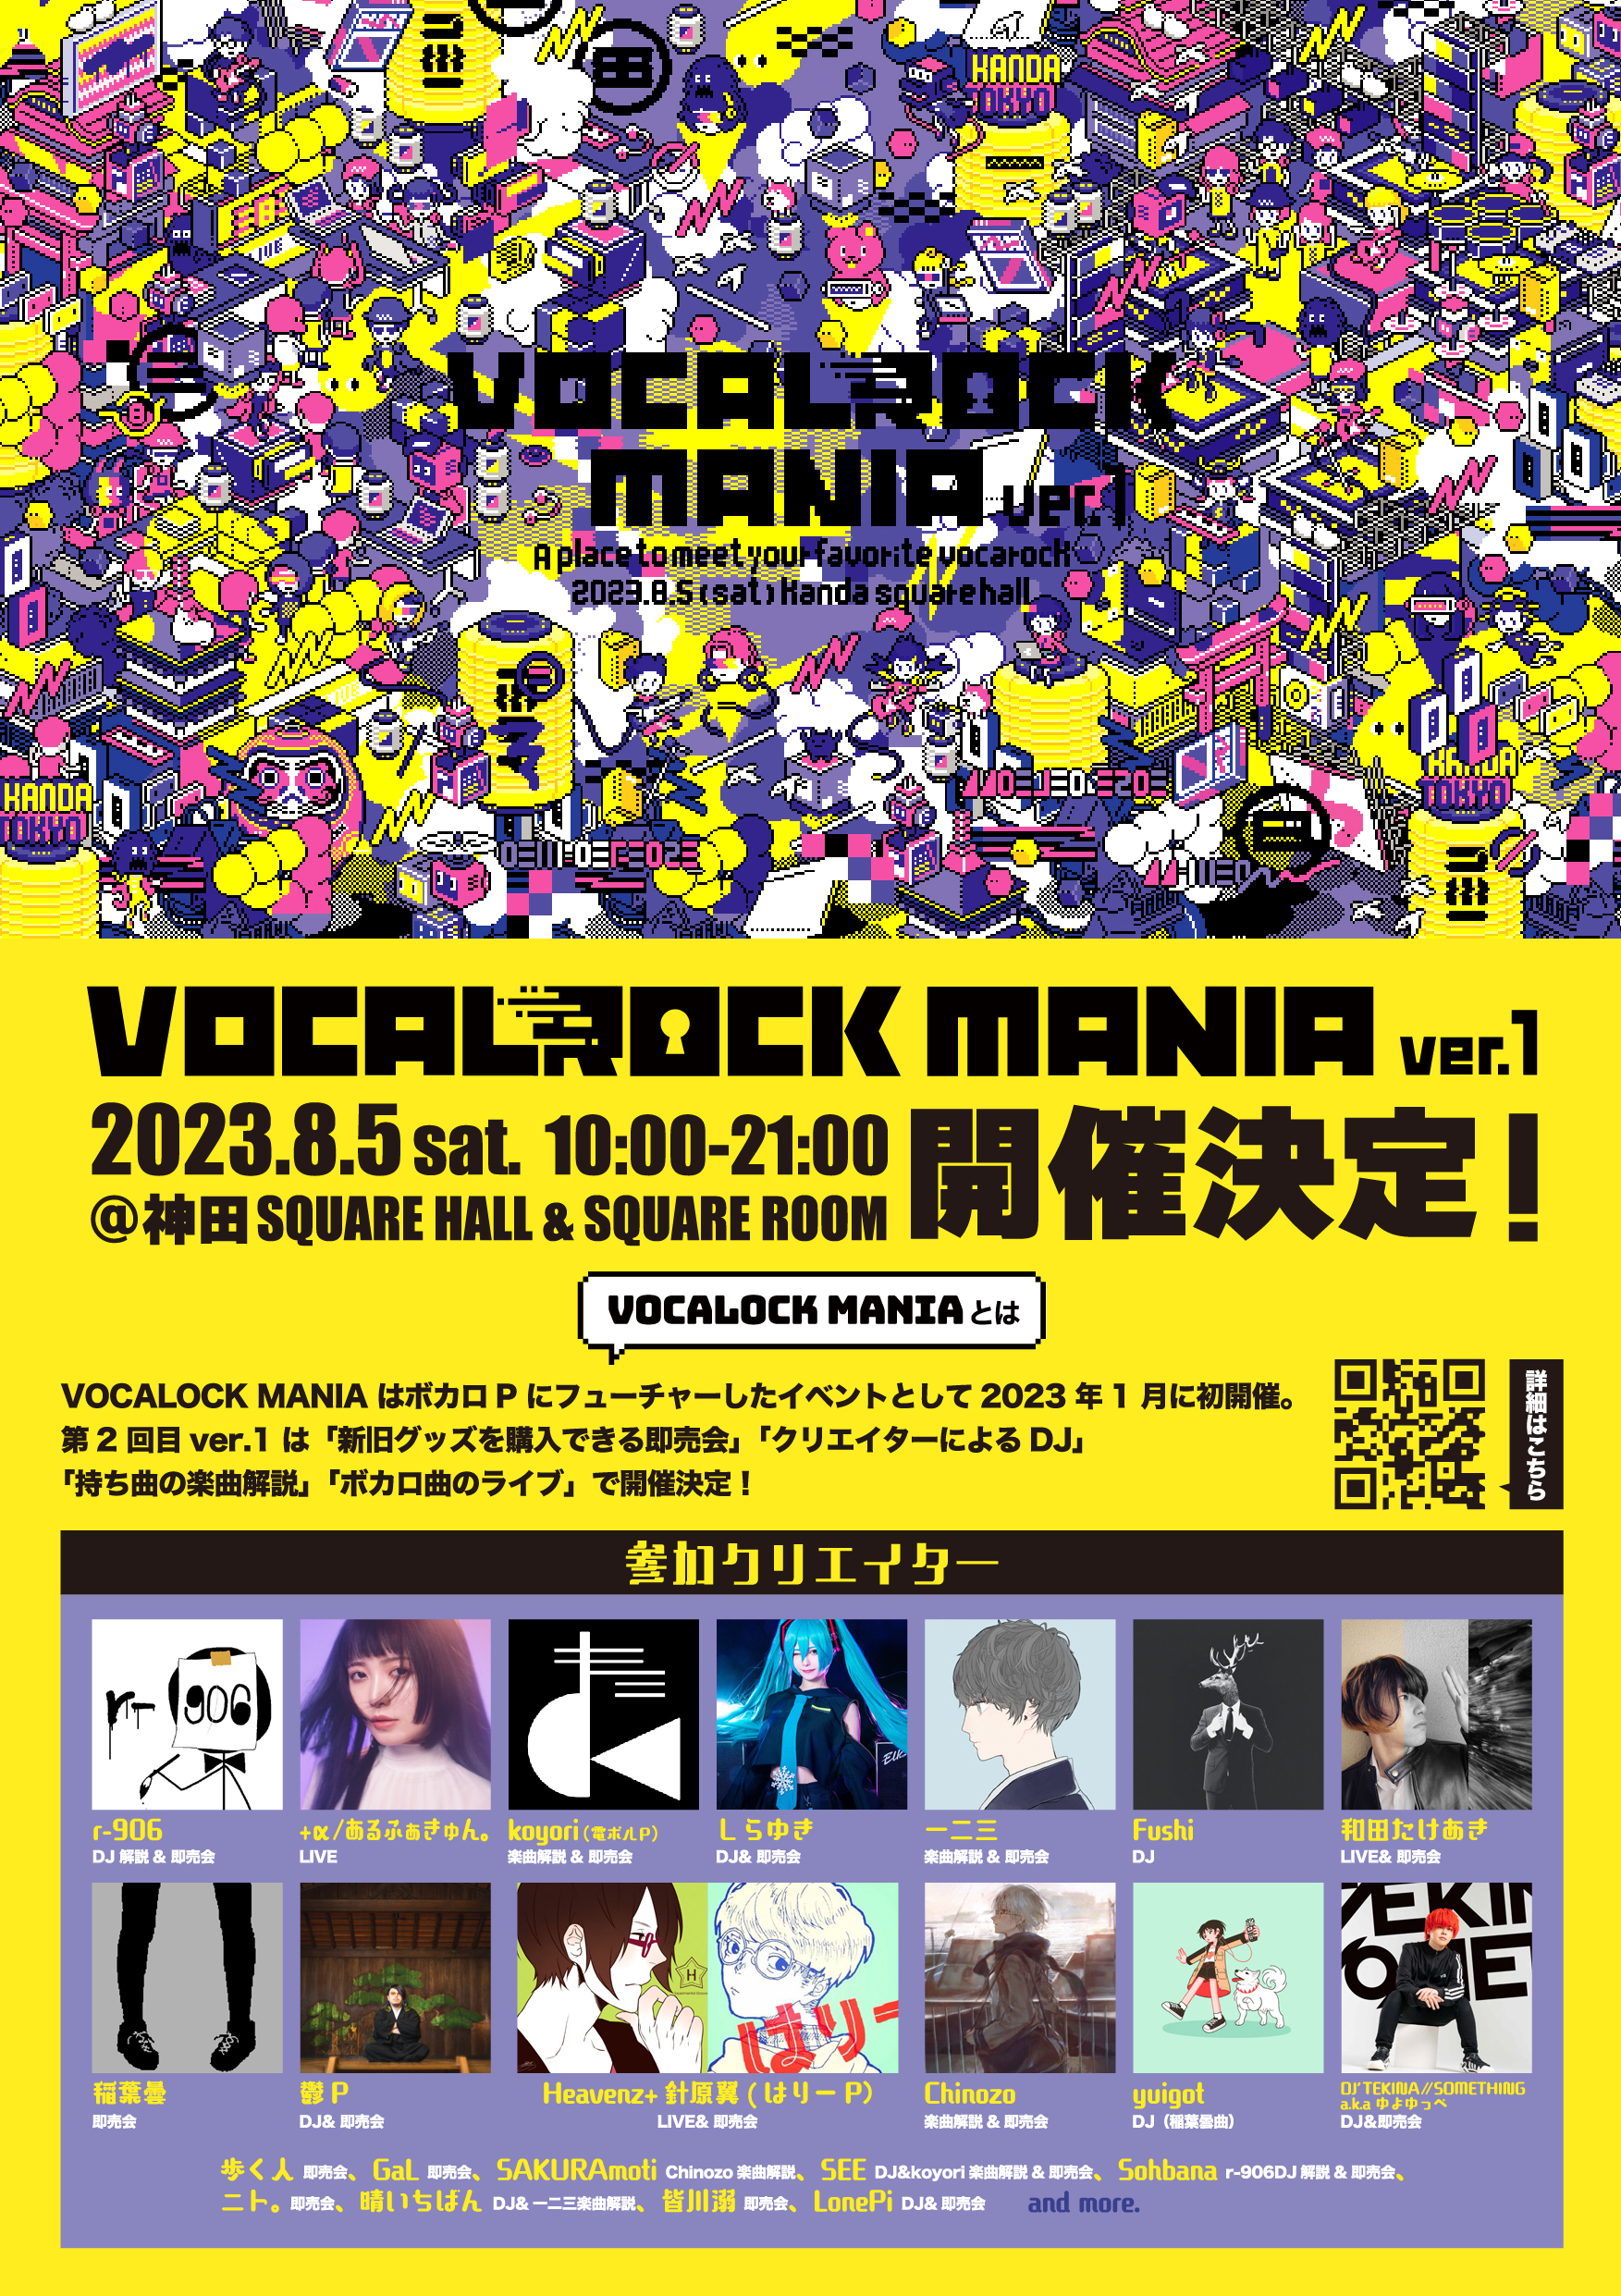 「VOCALOCK MANIA ver.1」にPuzzle Project参加アーティストの出演決定！